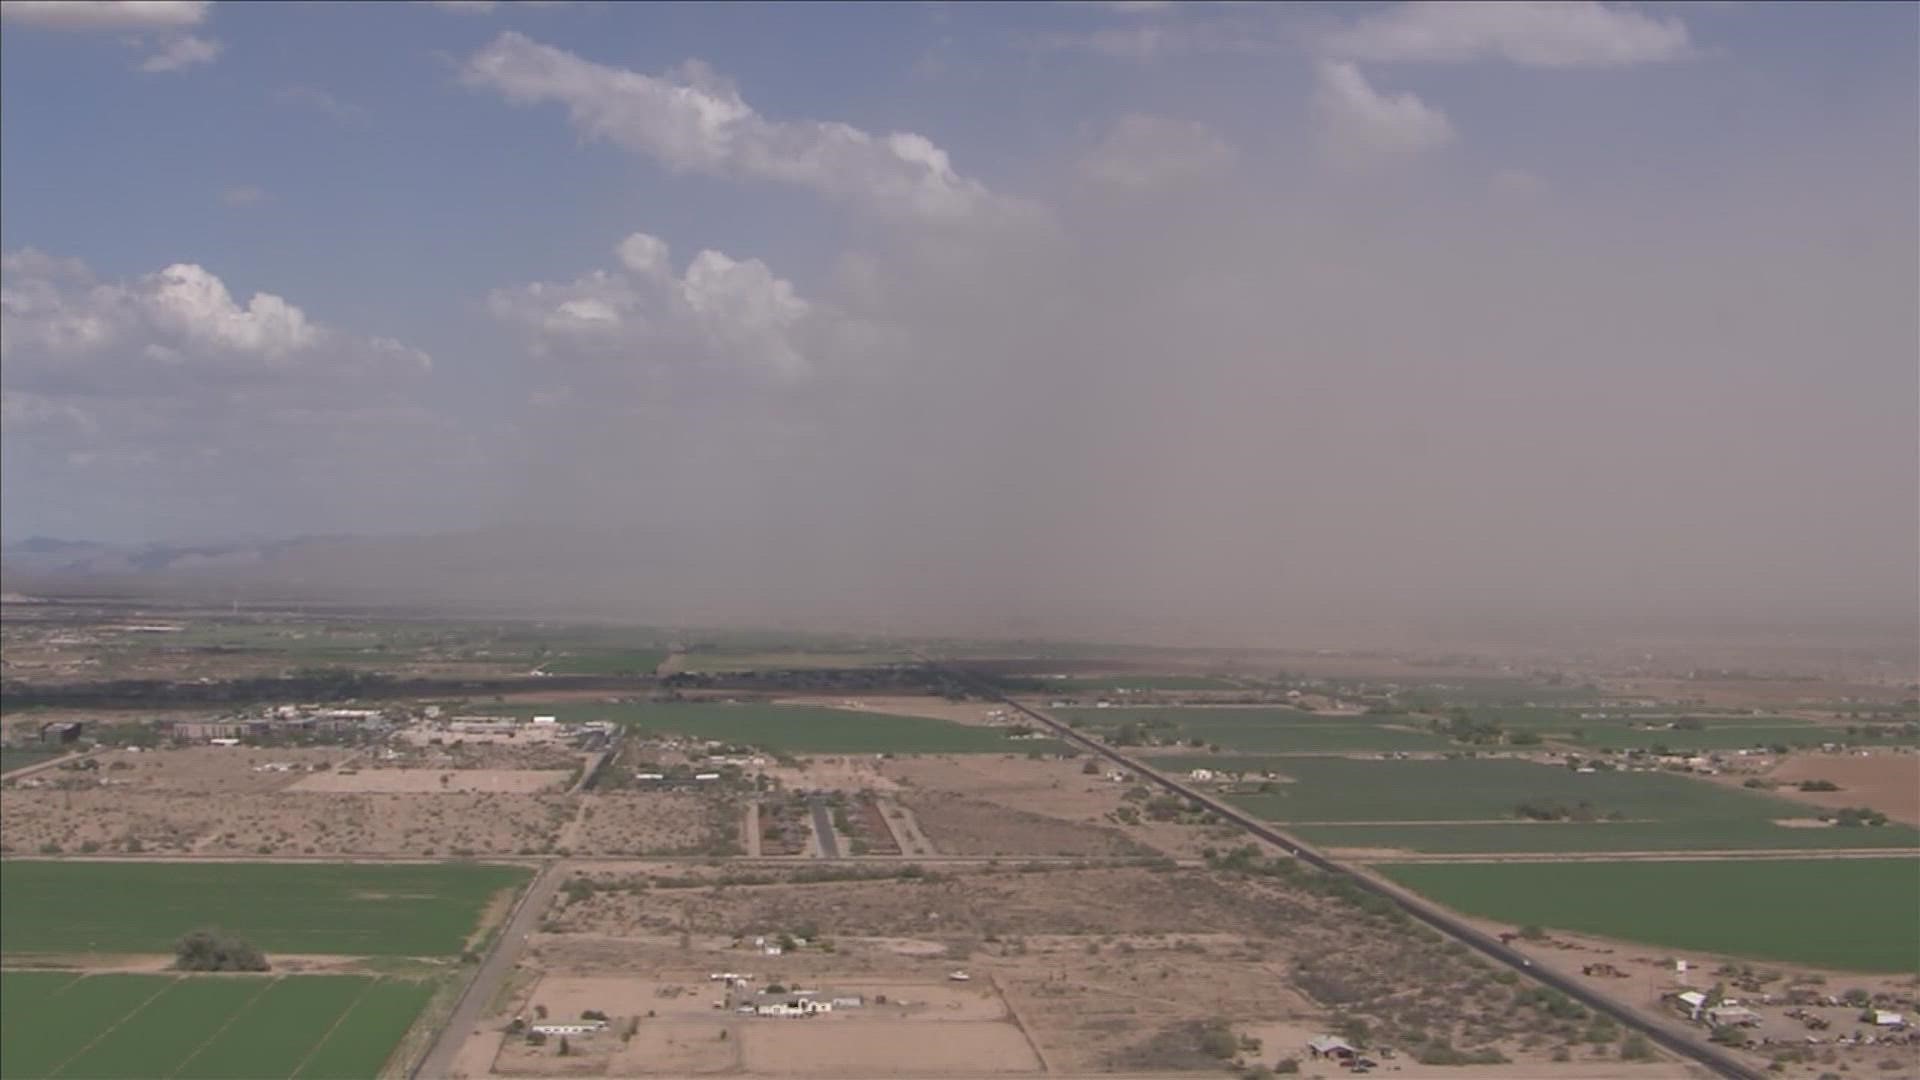 Sky 12 captured the dust storm on Monday afternoon near Chandler.